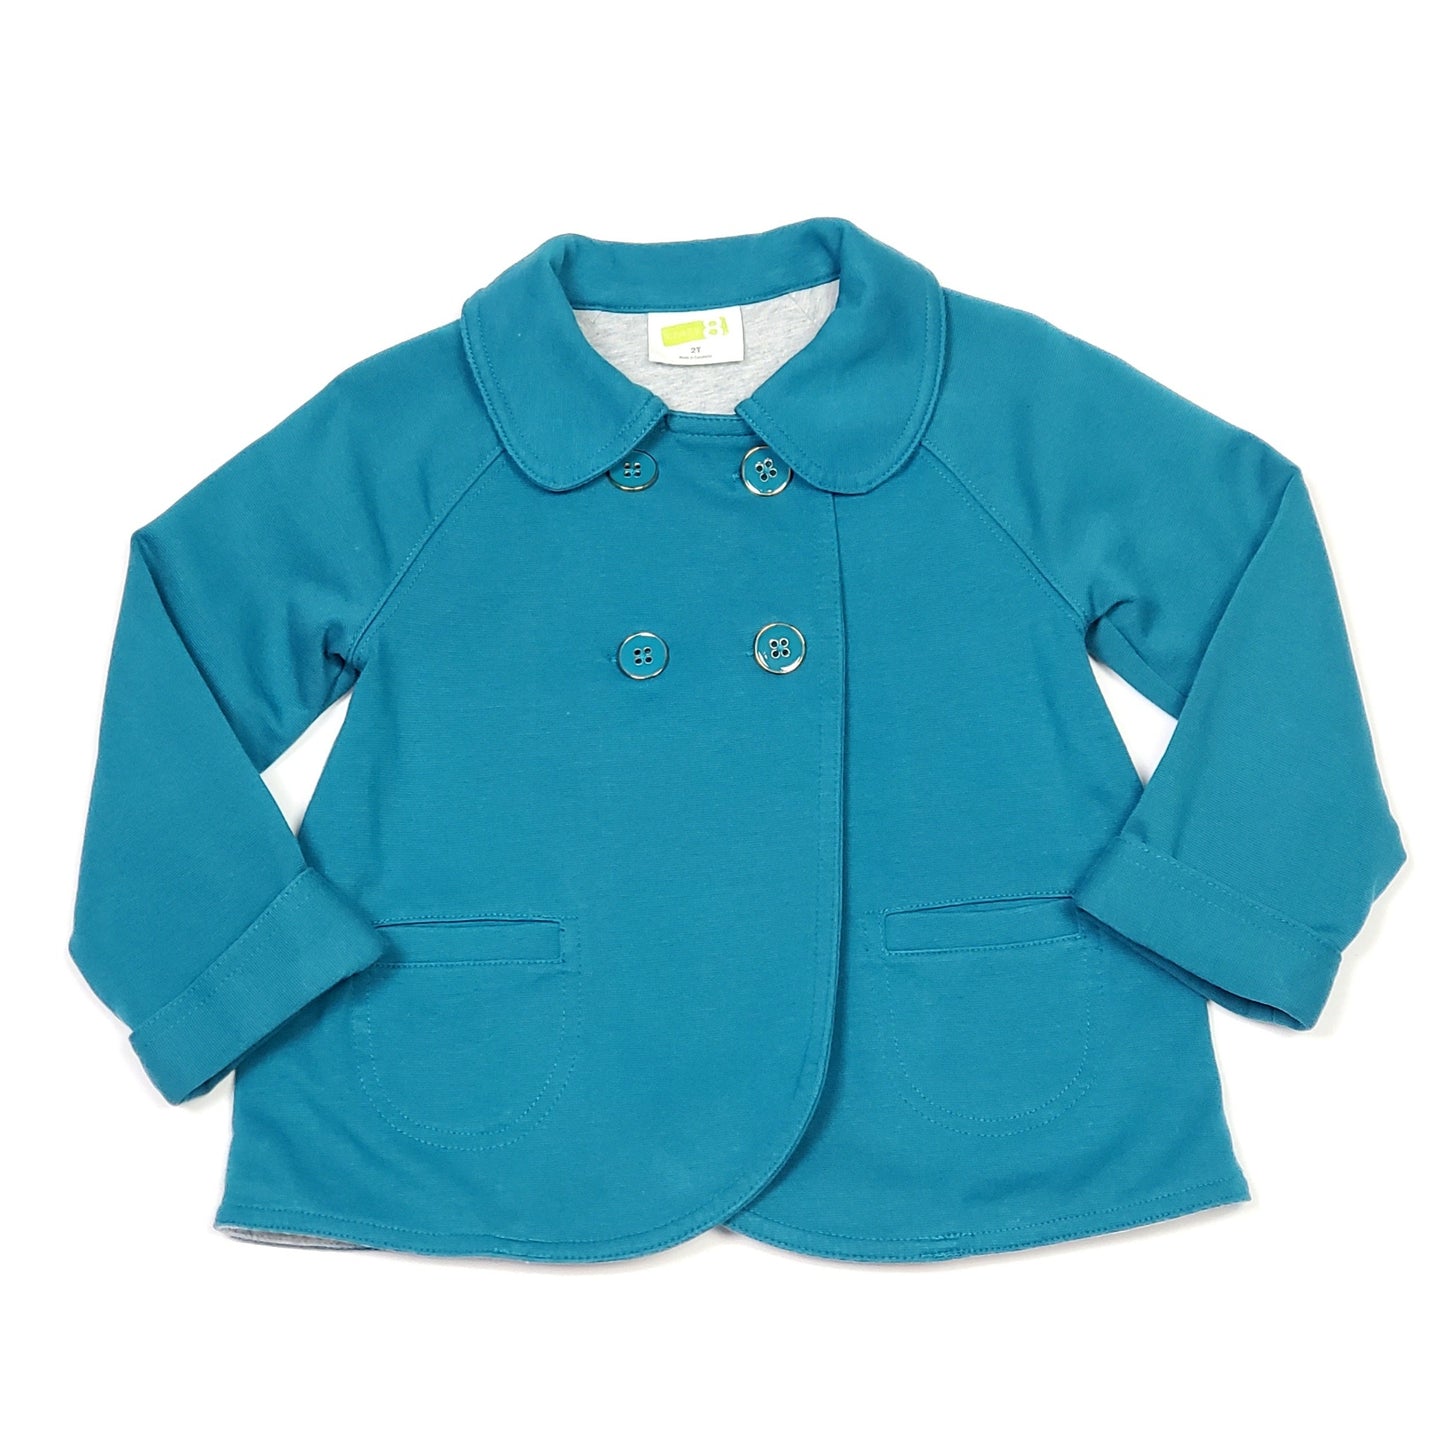 Crazy 8 Teal Girls Jacket 2T Used View 1